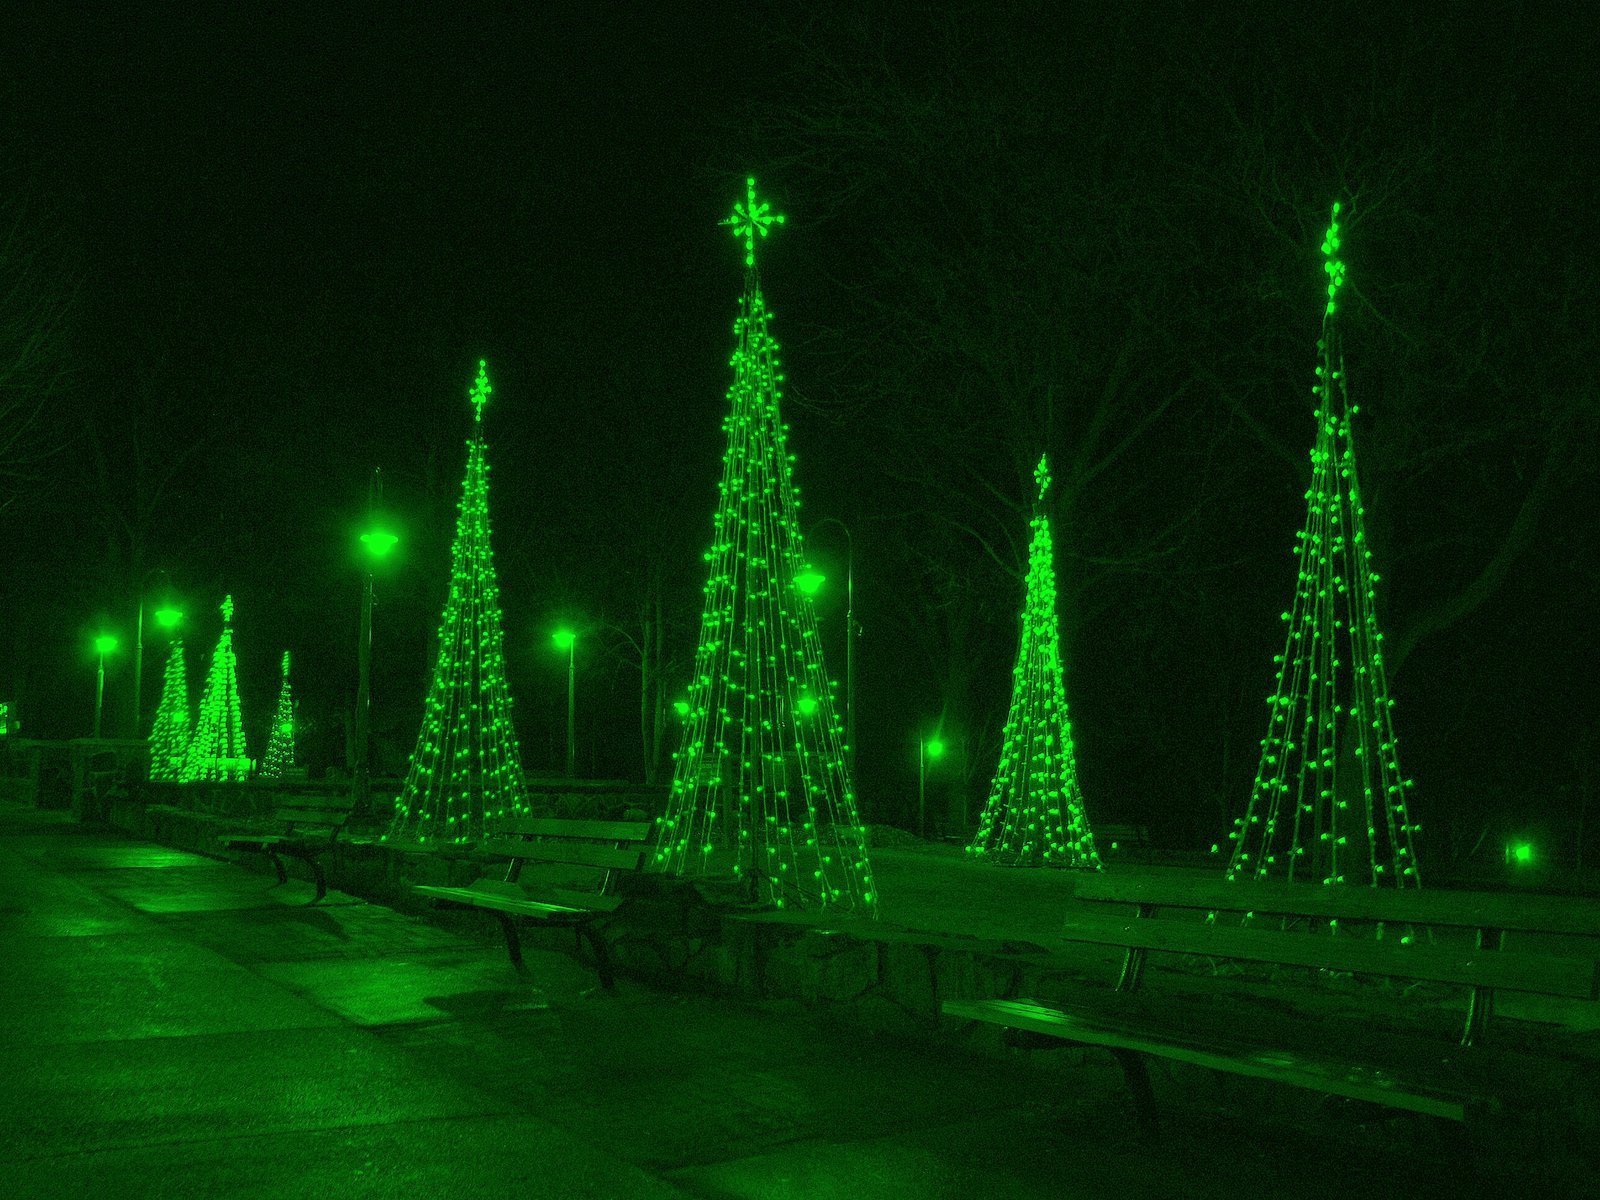 christmas trees are lit up at night and bright green